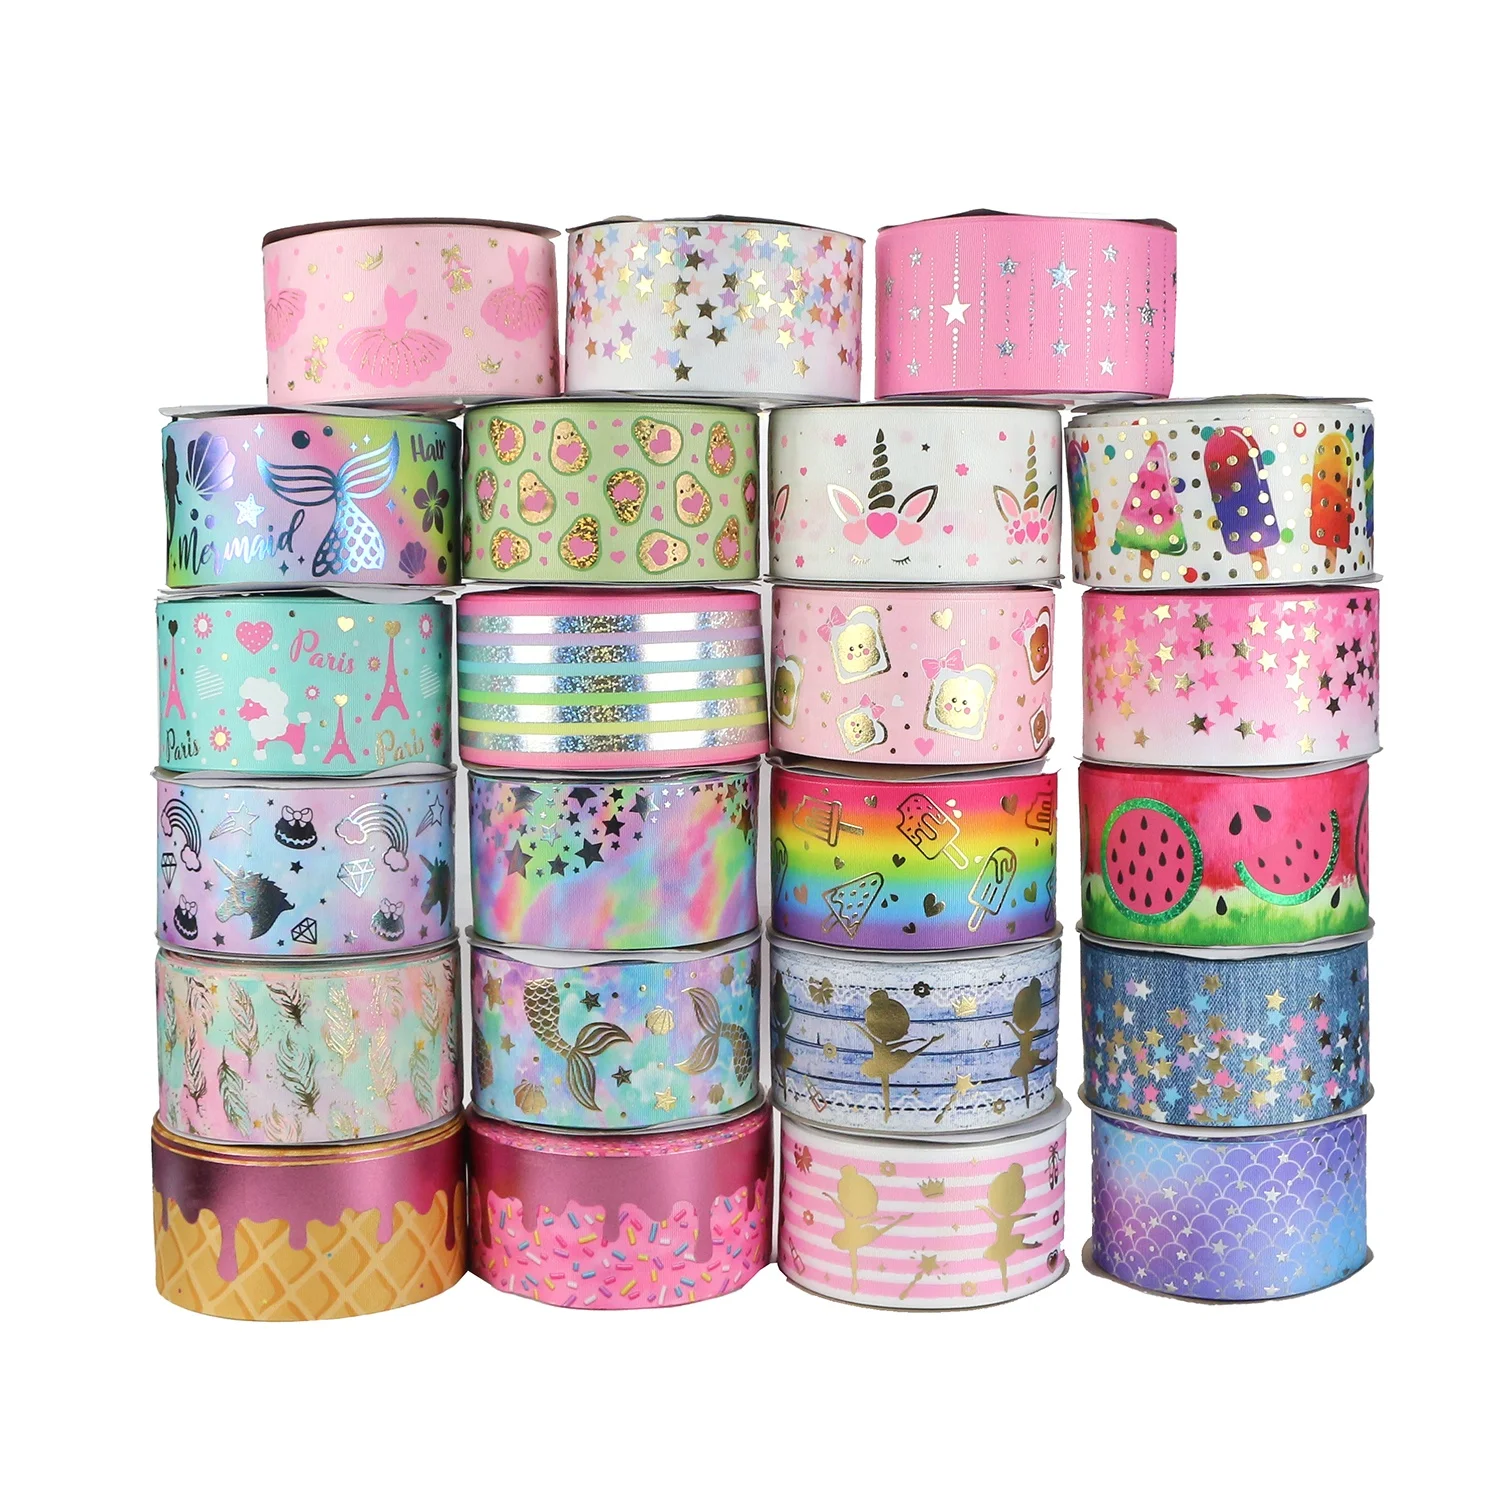 

Midi Ribbon Listones Various Hot Sale Foil Ink Printed 3" 75mm Grosgrain Ribbon For Hair Bows DIY Crafts, Request